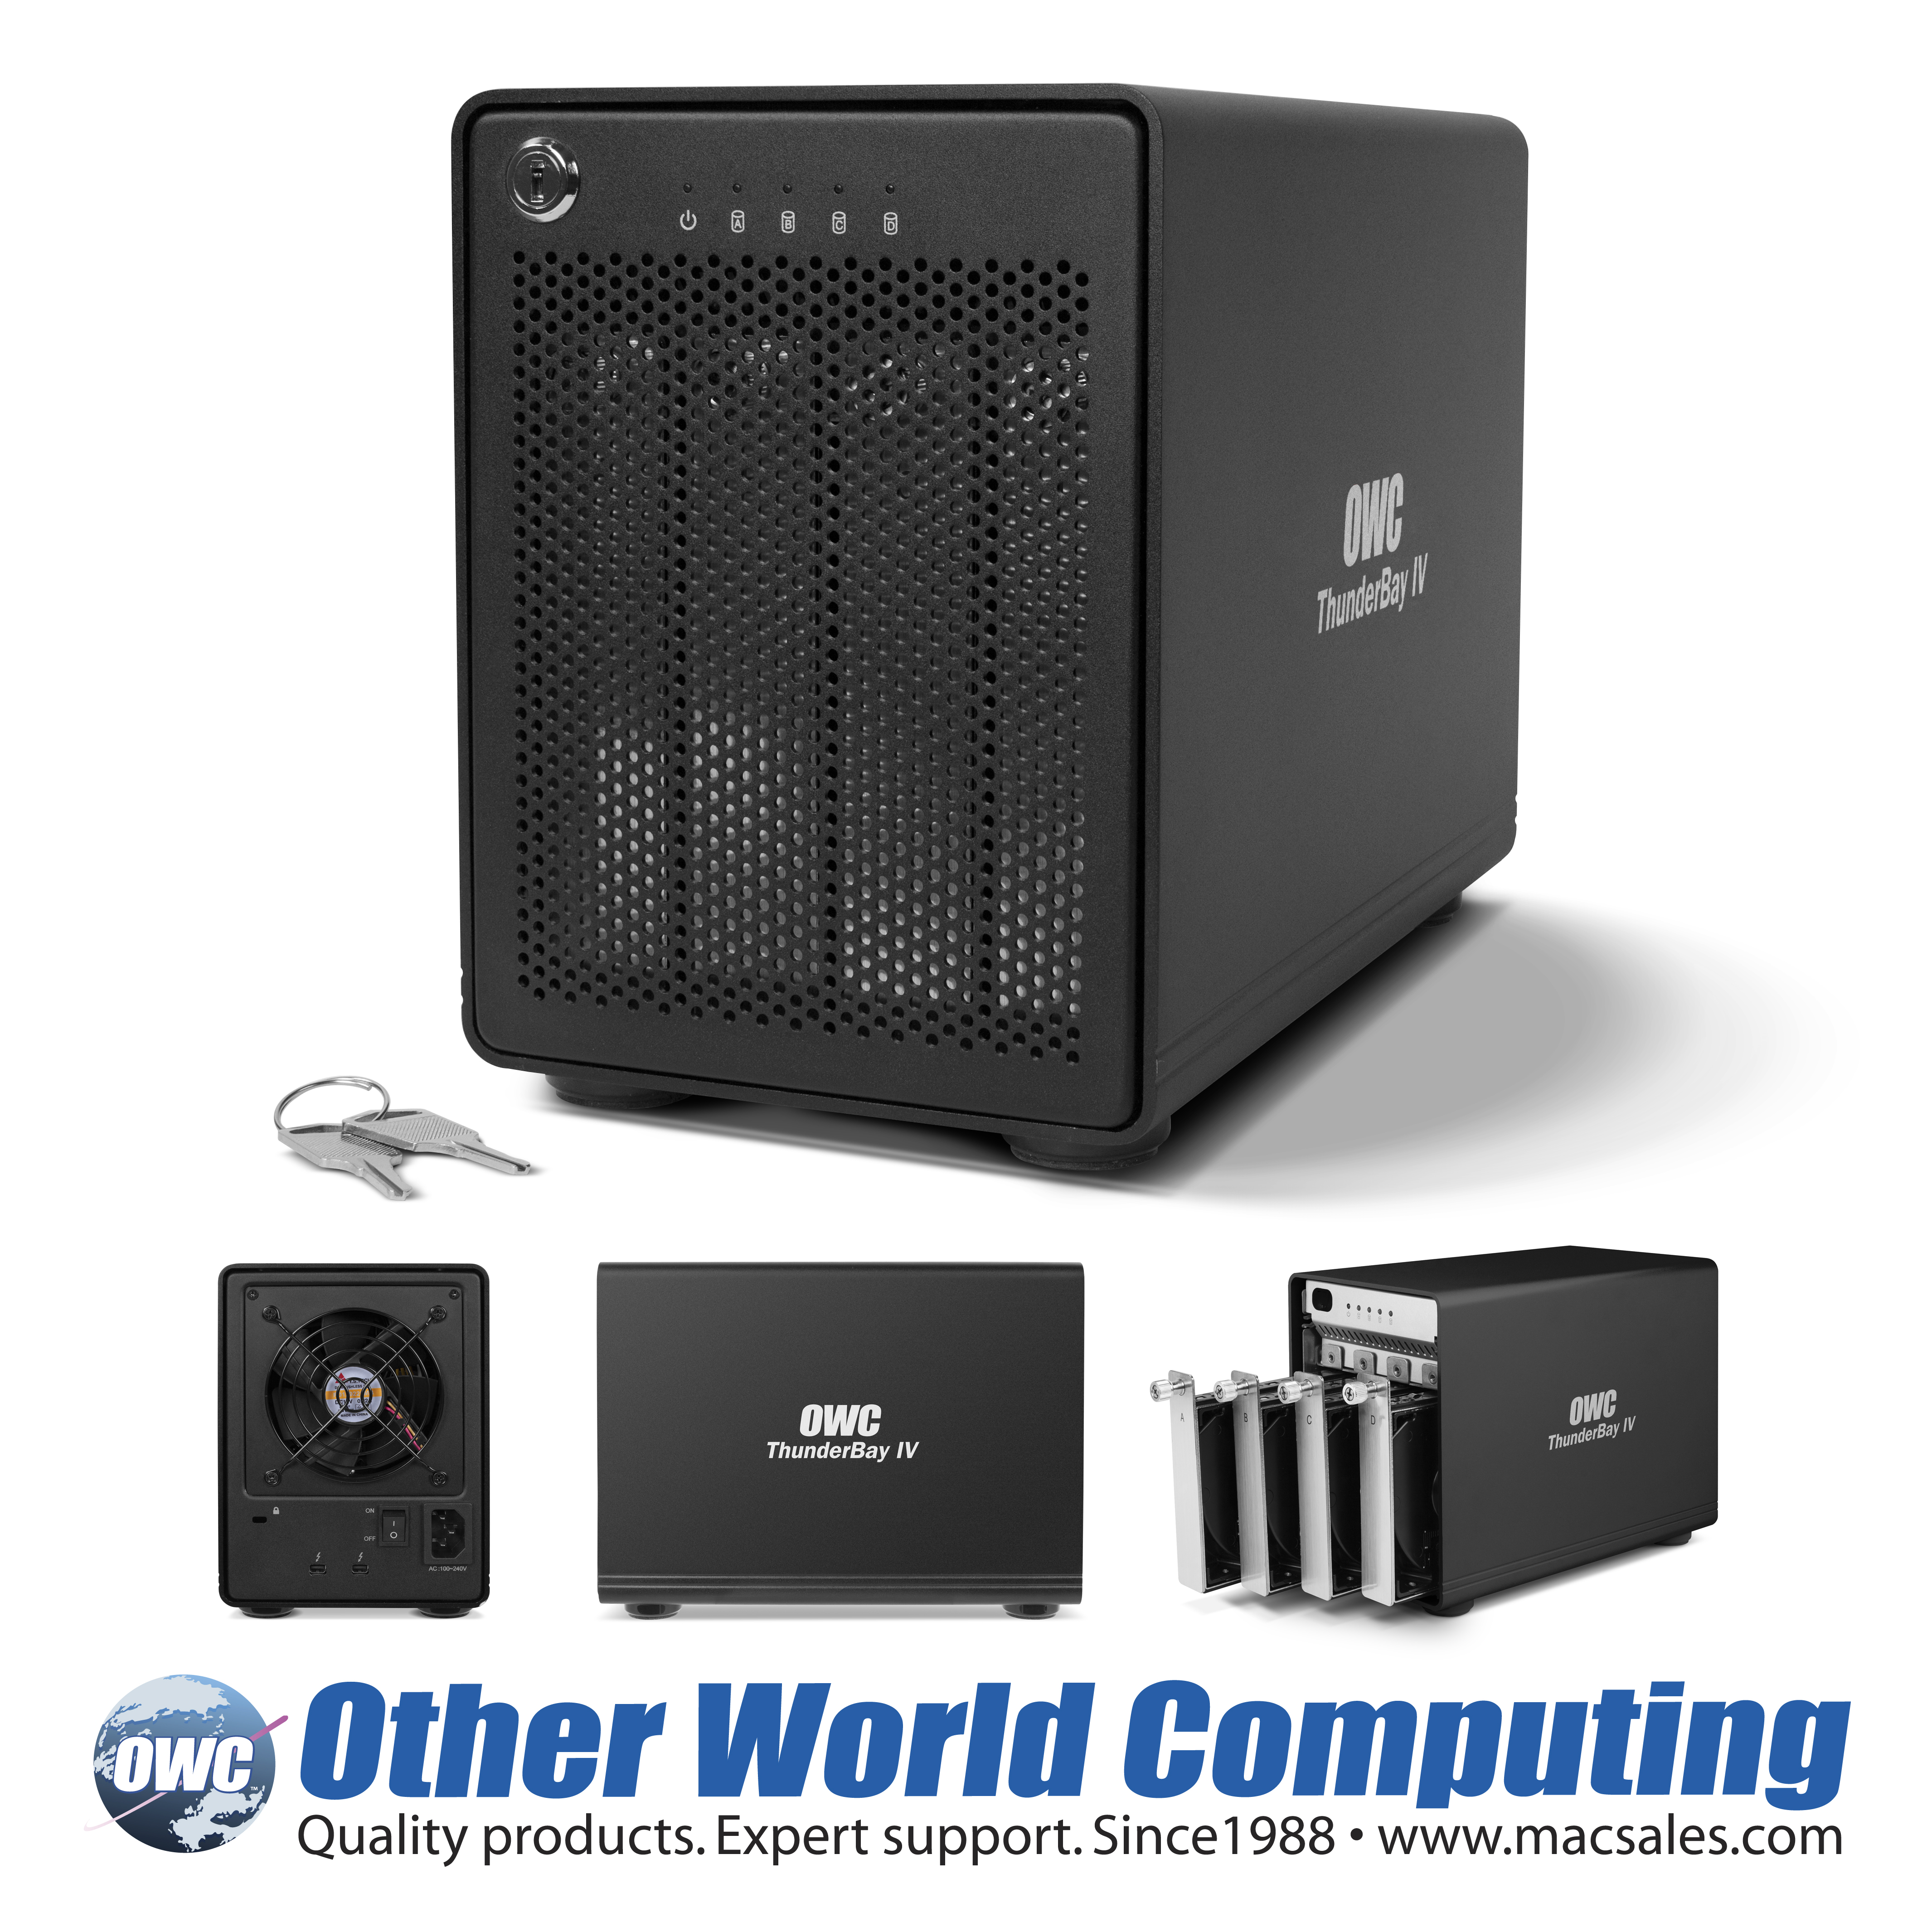 OWC ThunderBay IV Storage Solution for Thunderbol​t Technology Now in 20TB